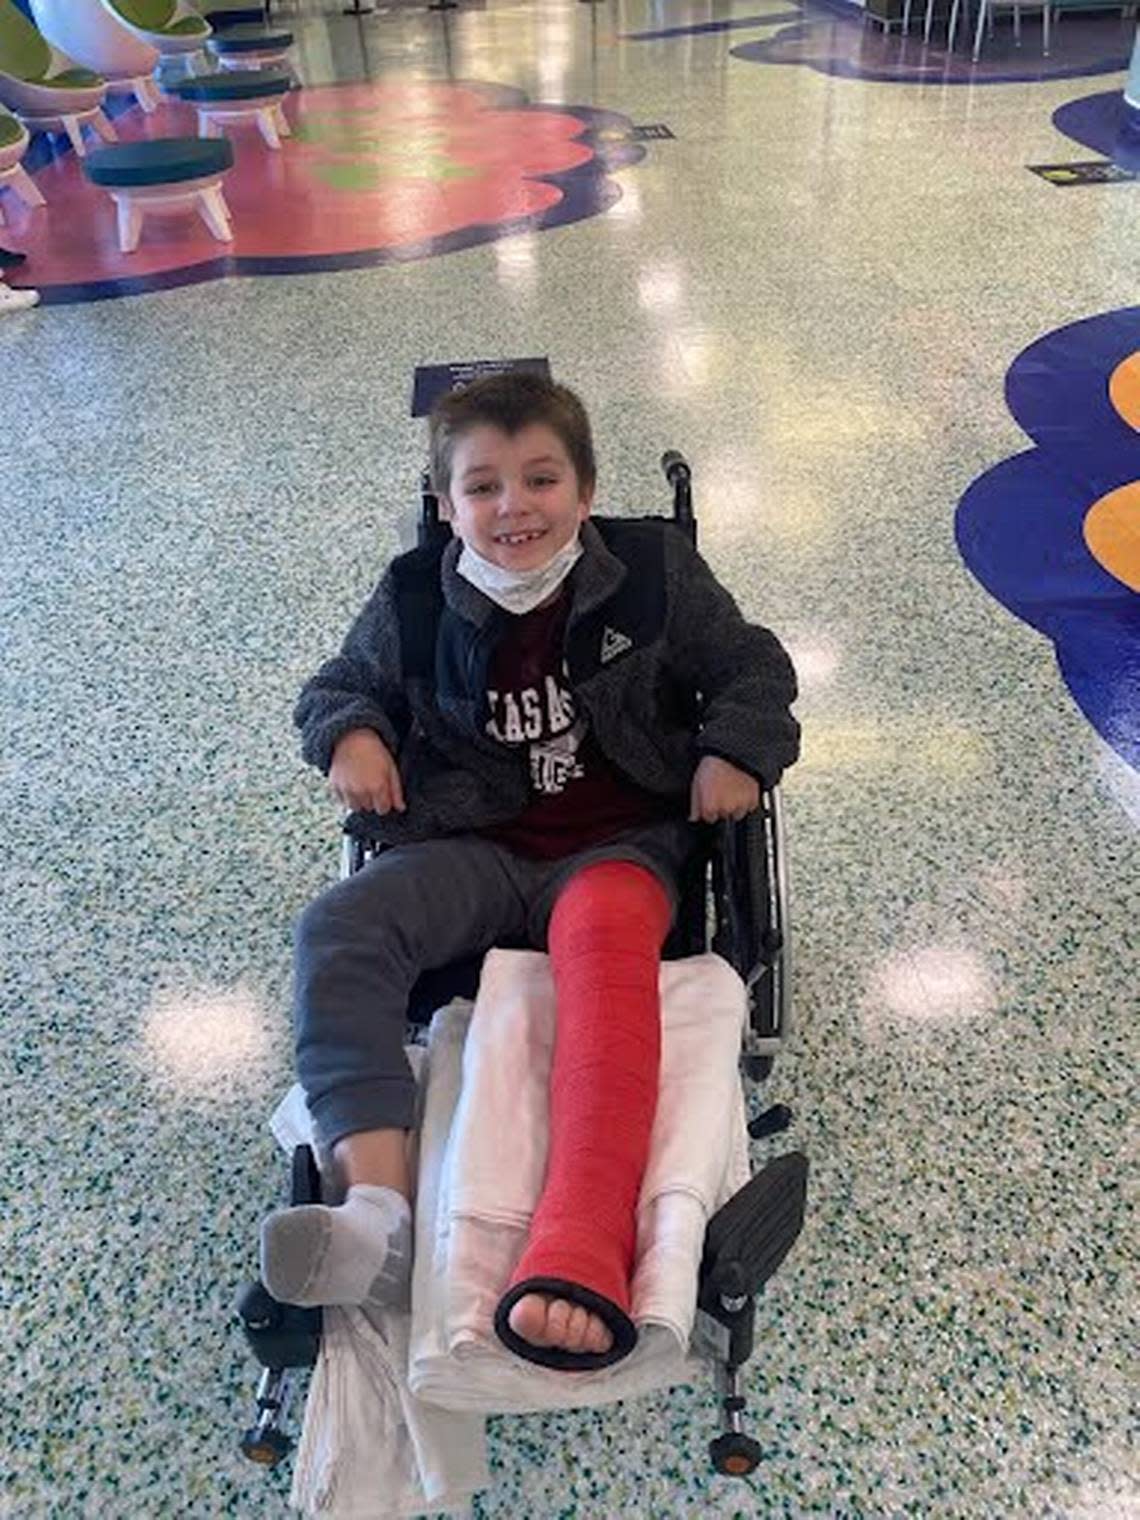 Micah Reed, 8, broke his leg at a North Texas trampoline park. He was in a full leg cast and temporarily confined to a wheelchair.